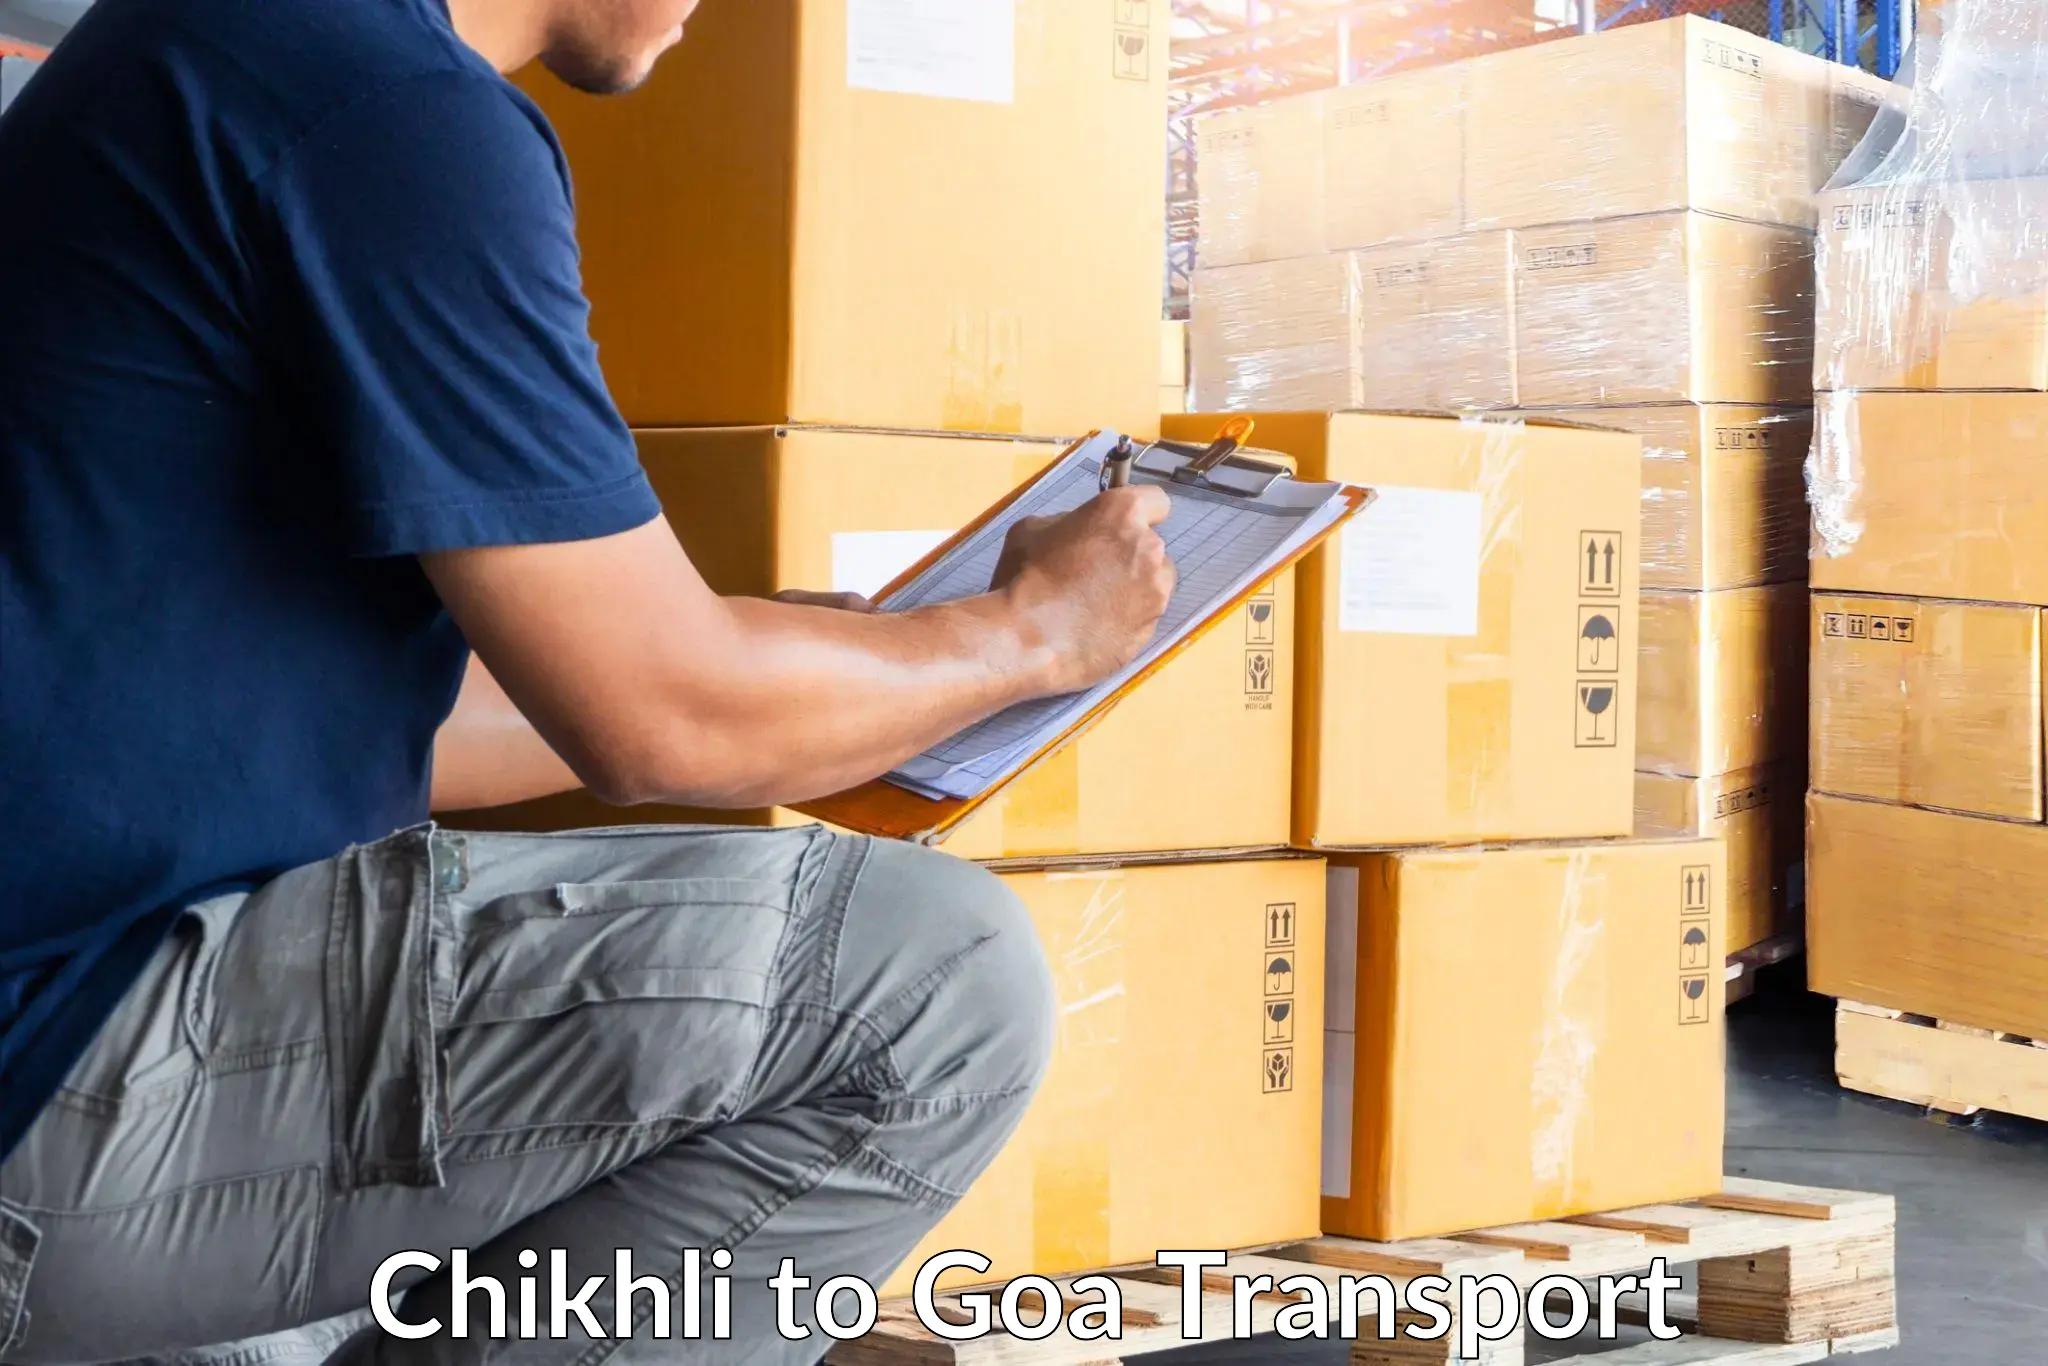 Truck transport companies in India Chikhli to Goa